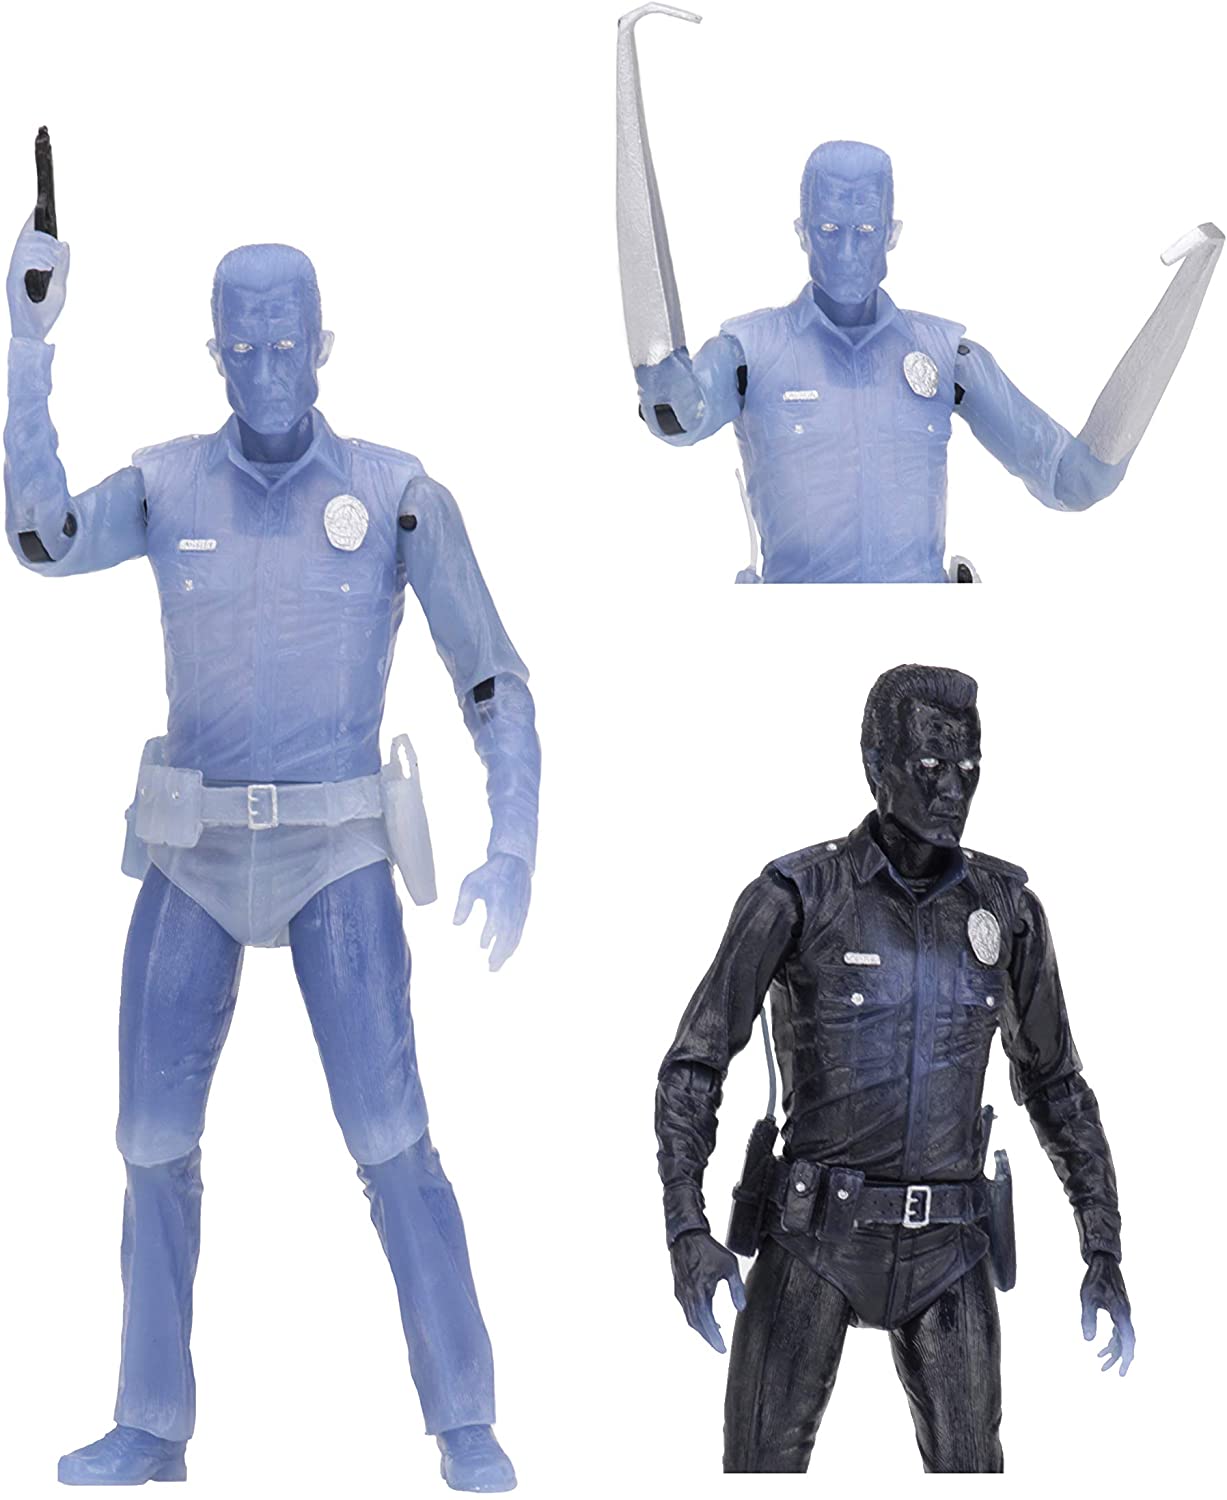 NECA - Terminator 2 - 7" Scale Action Figure - Kenner Tribute - White Hot T-1000